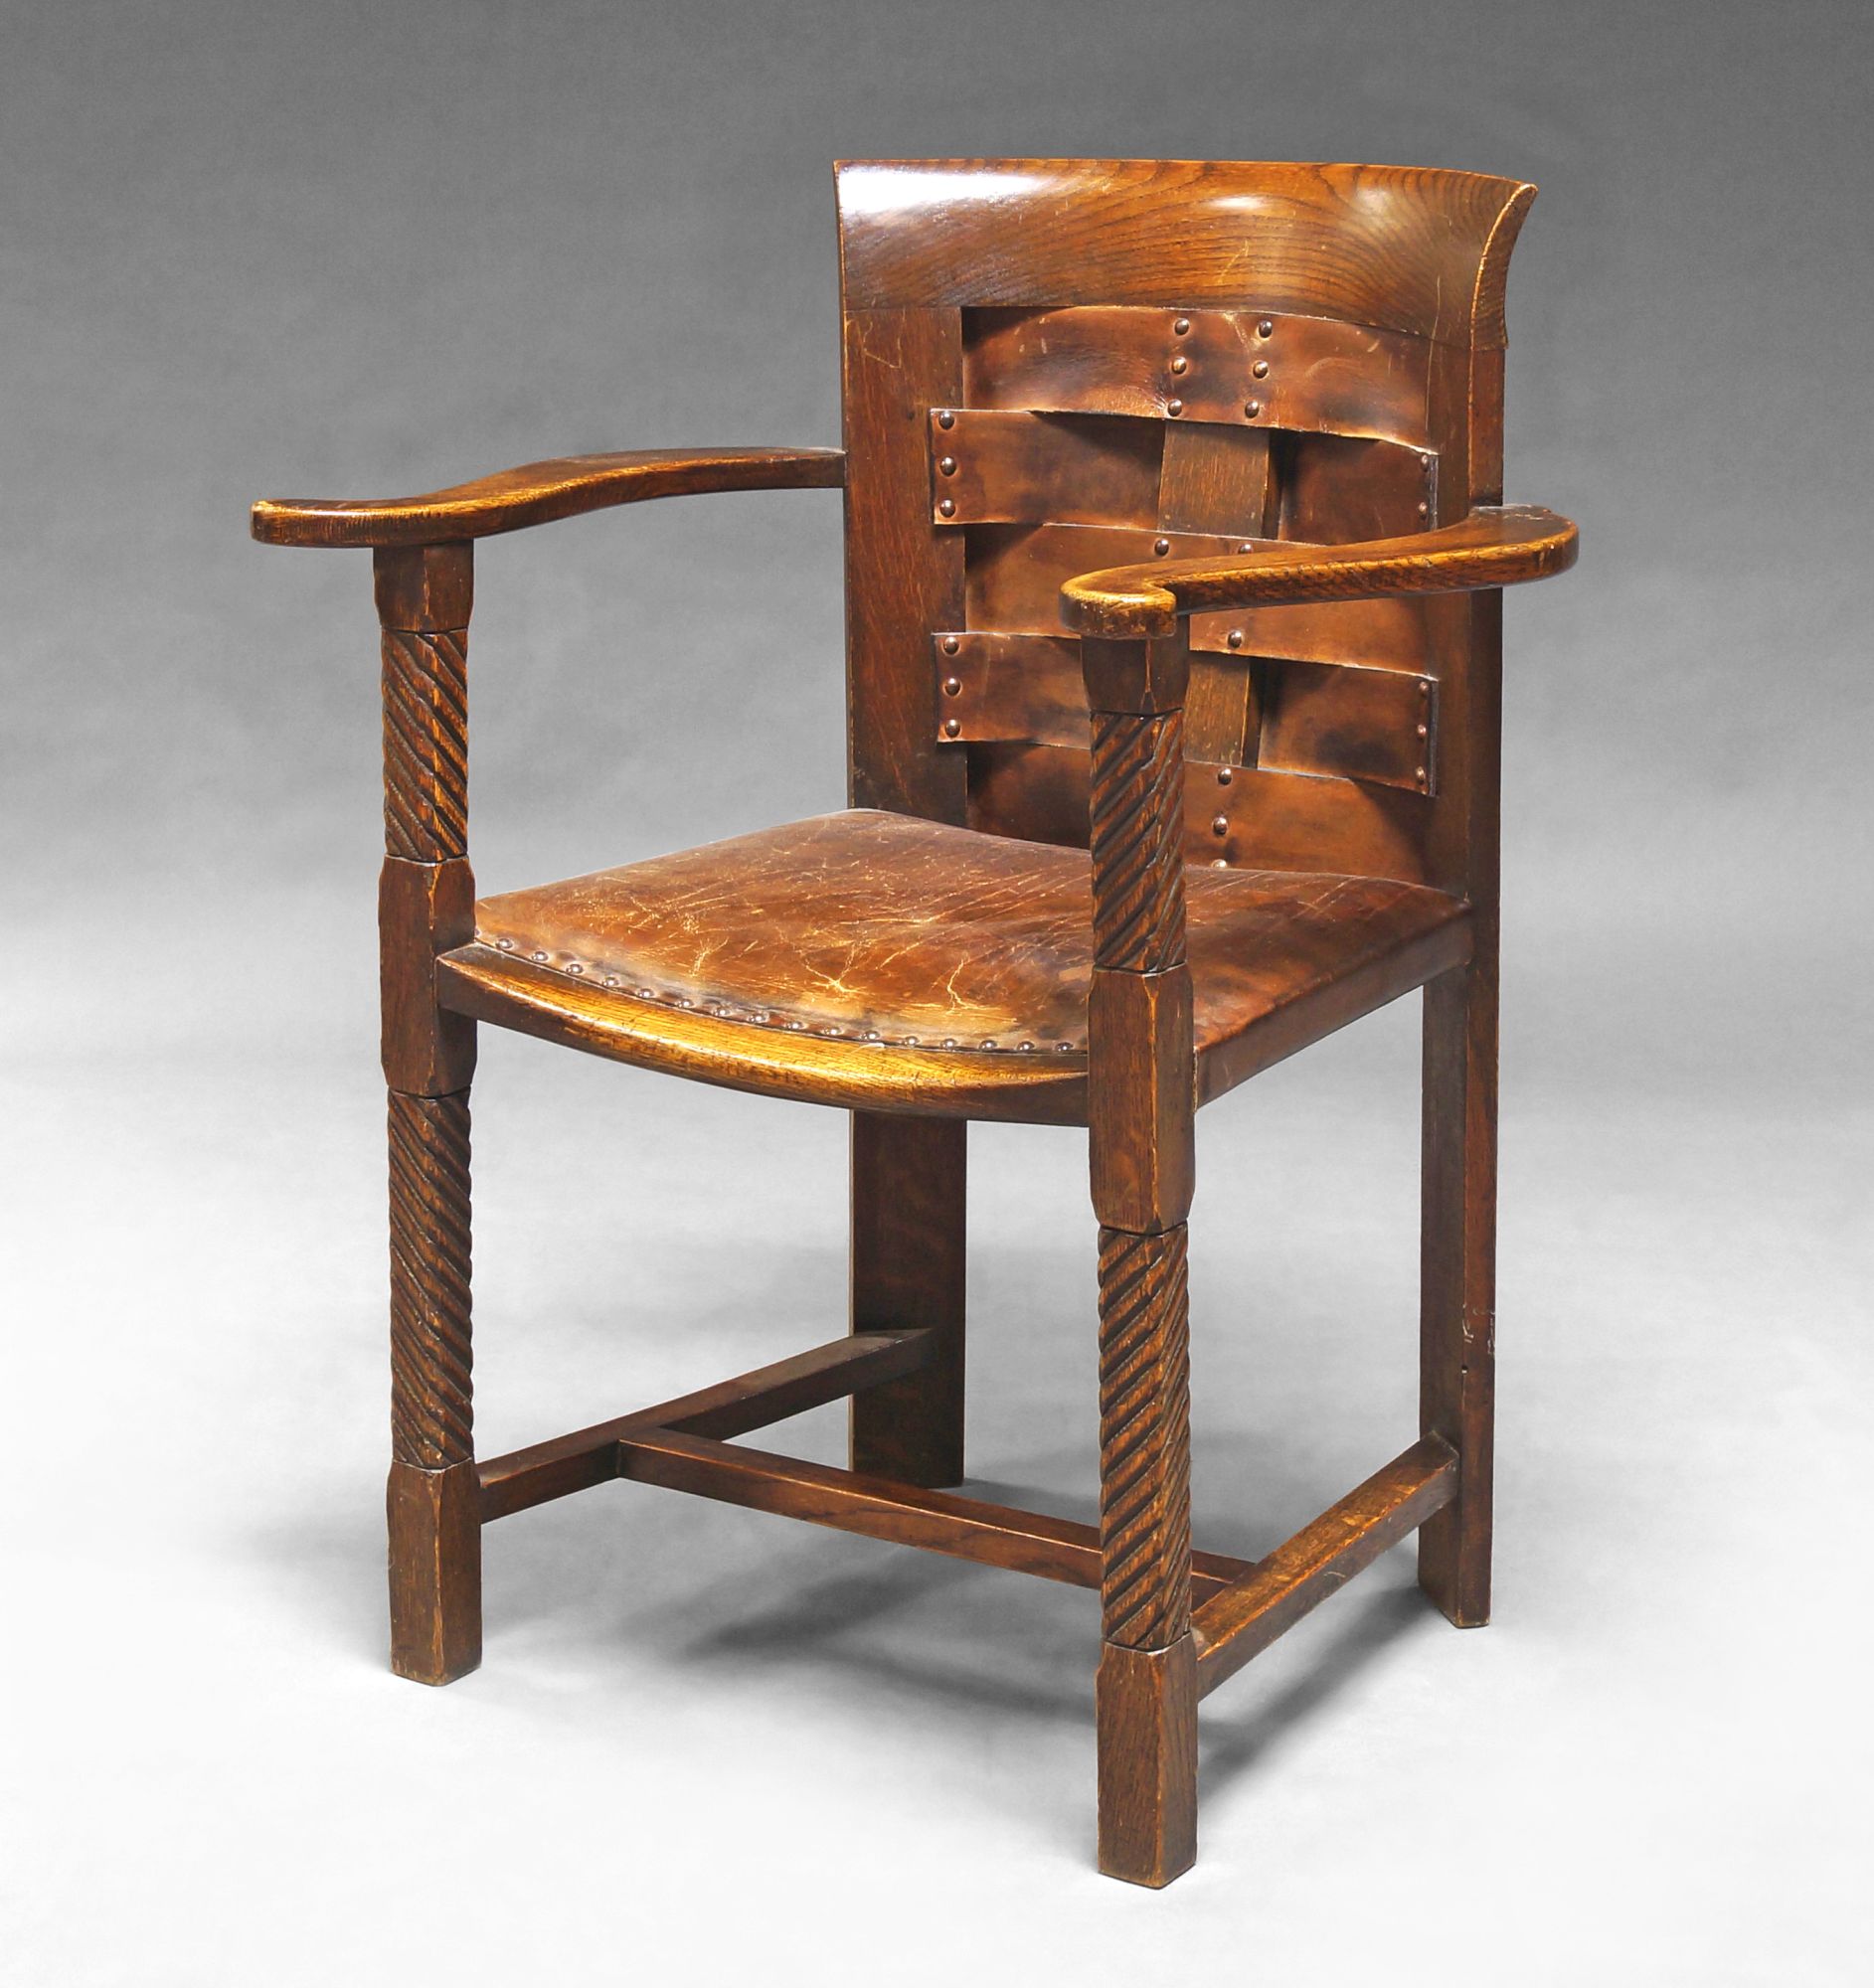 An Arts and Crafts oak armchair, c.